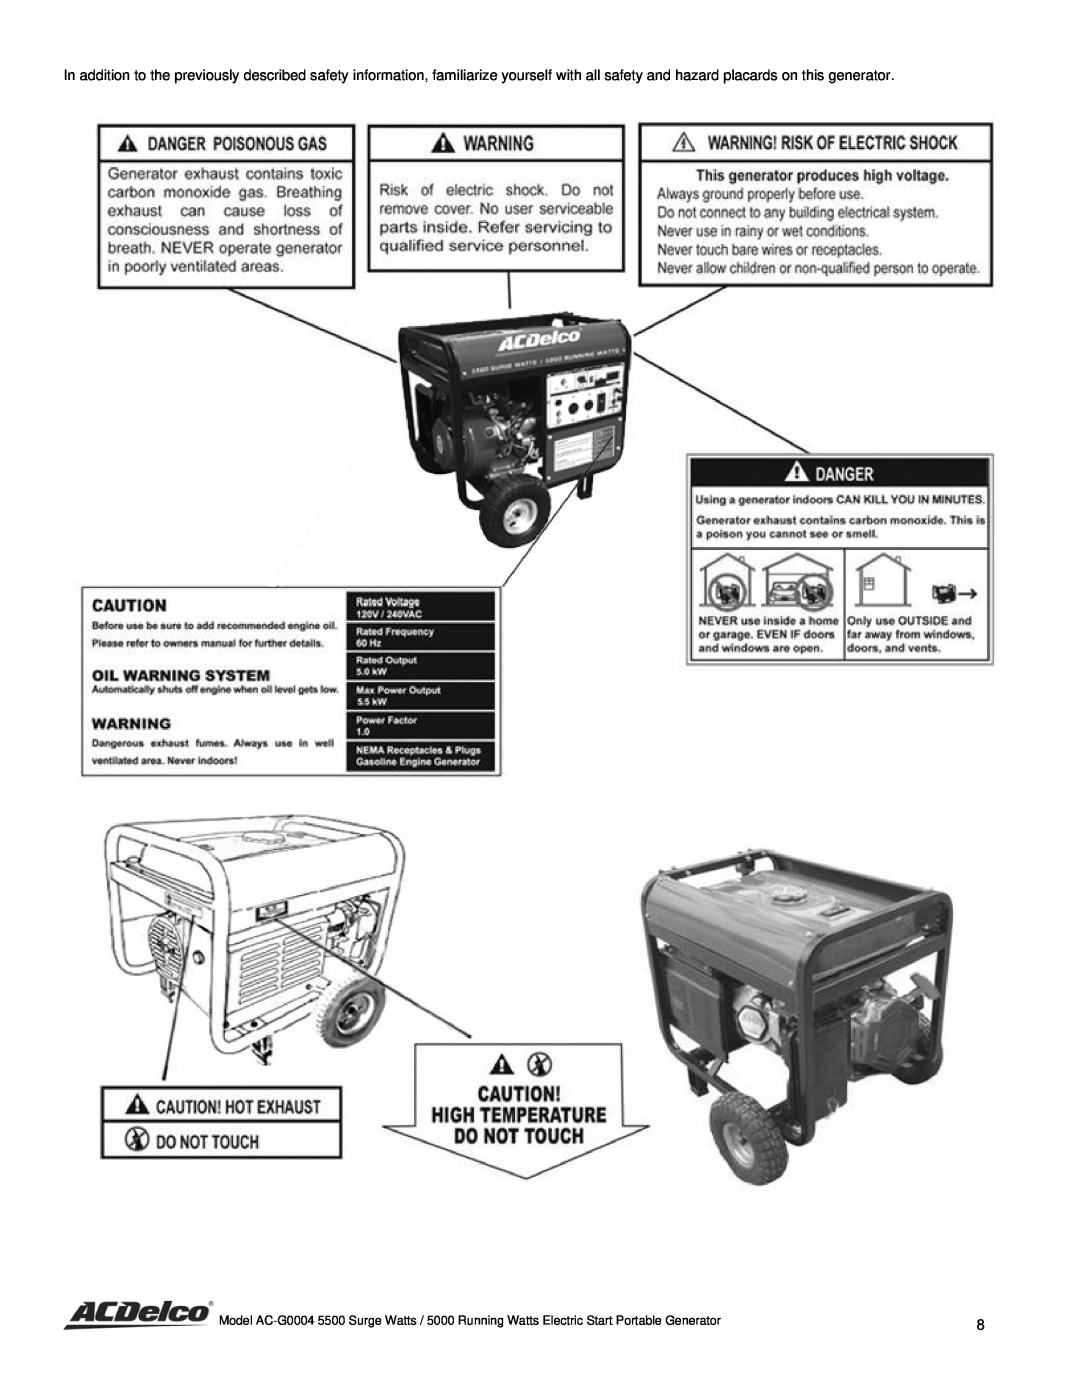 ACDelco AC-G0004 instruction manual 